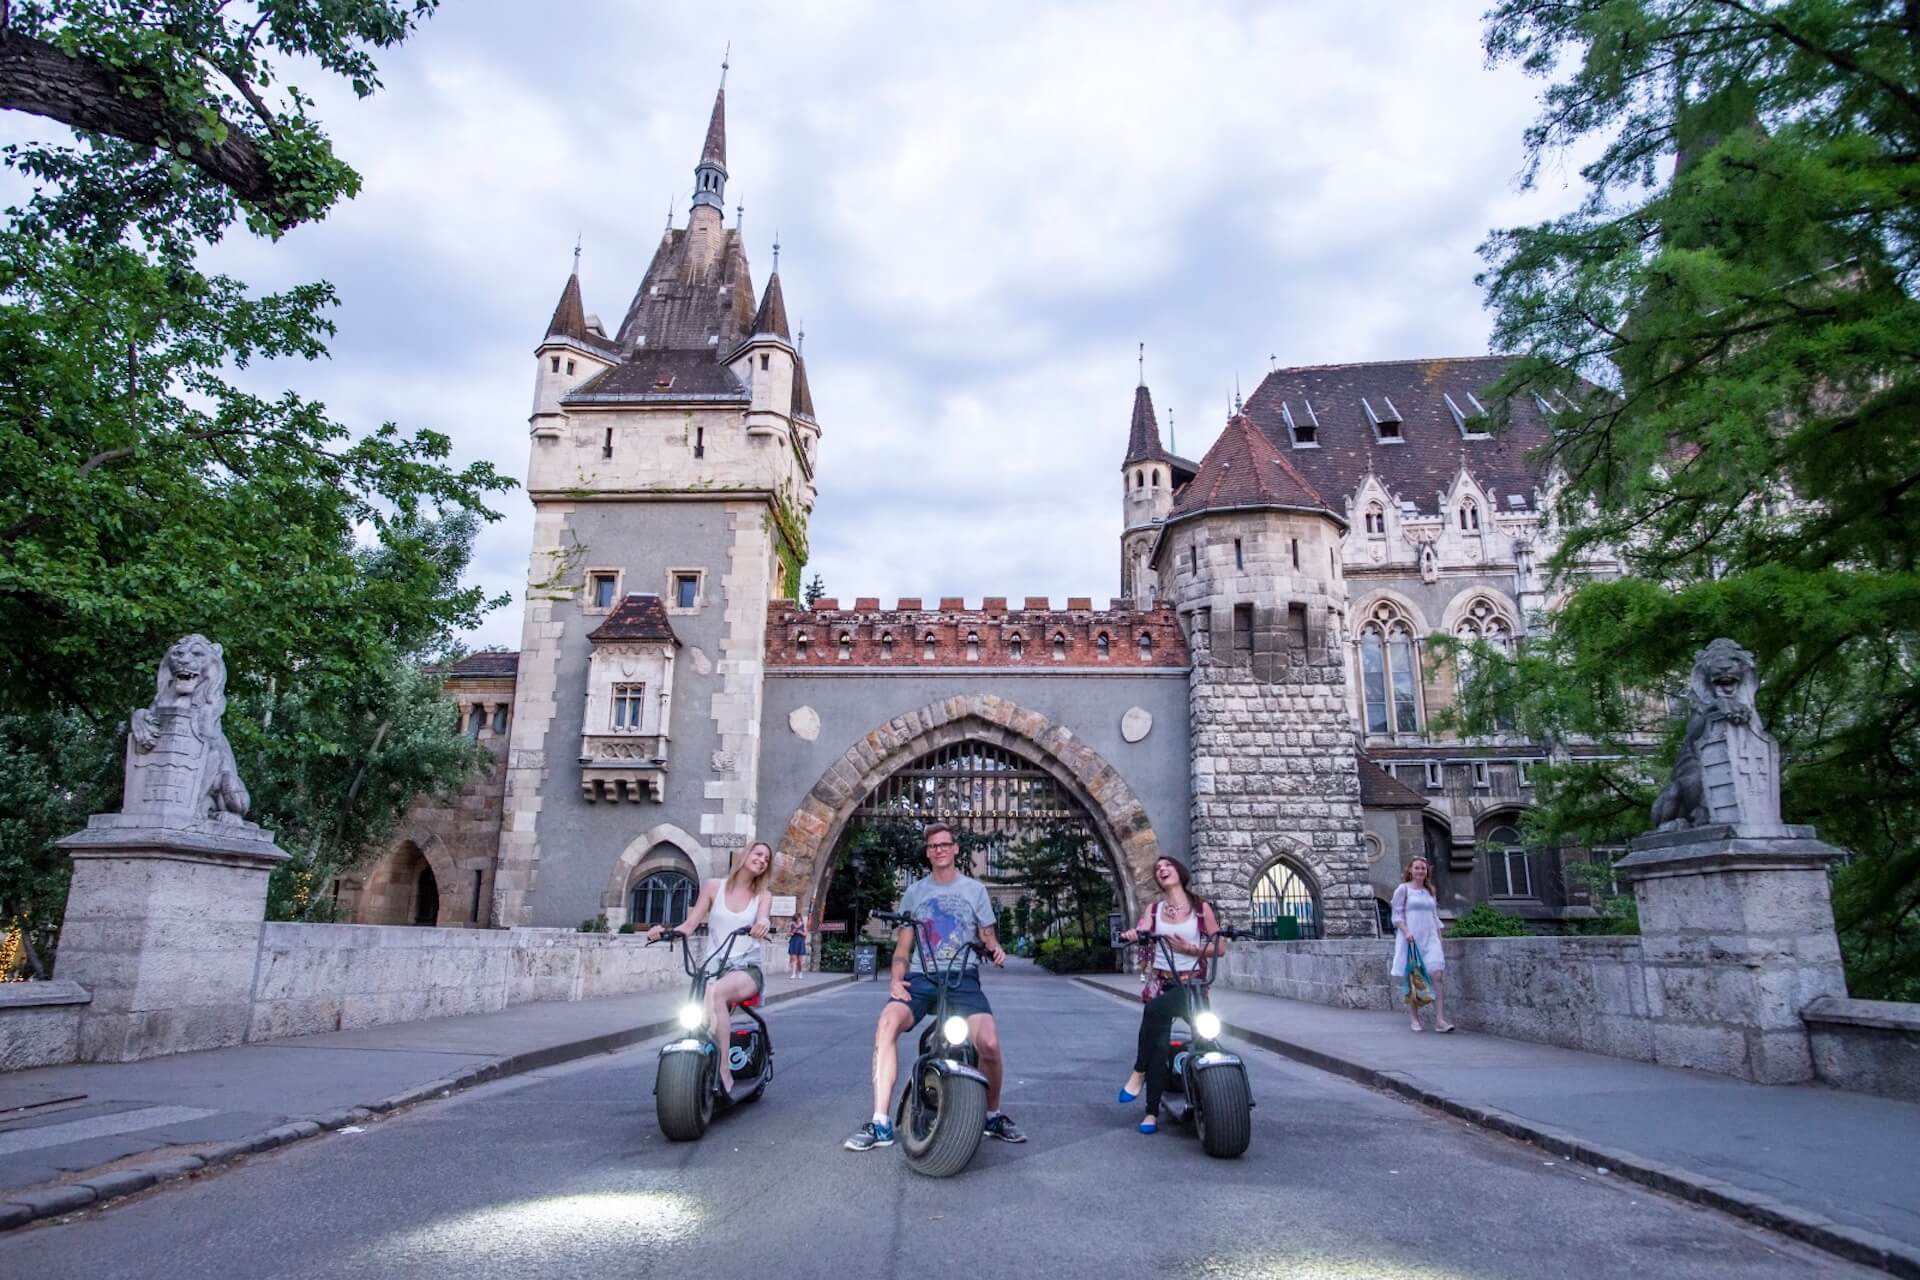 People riding MonsteRollers in front of the entrance of Vajdahunyad Castle